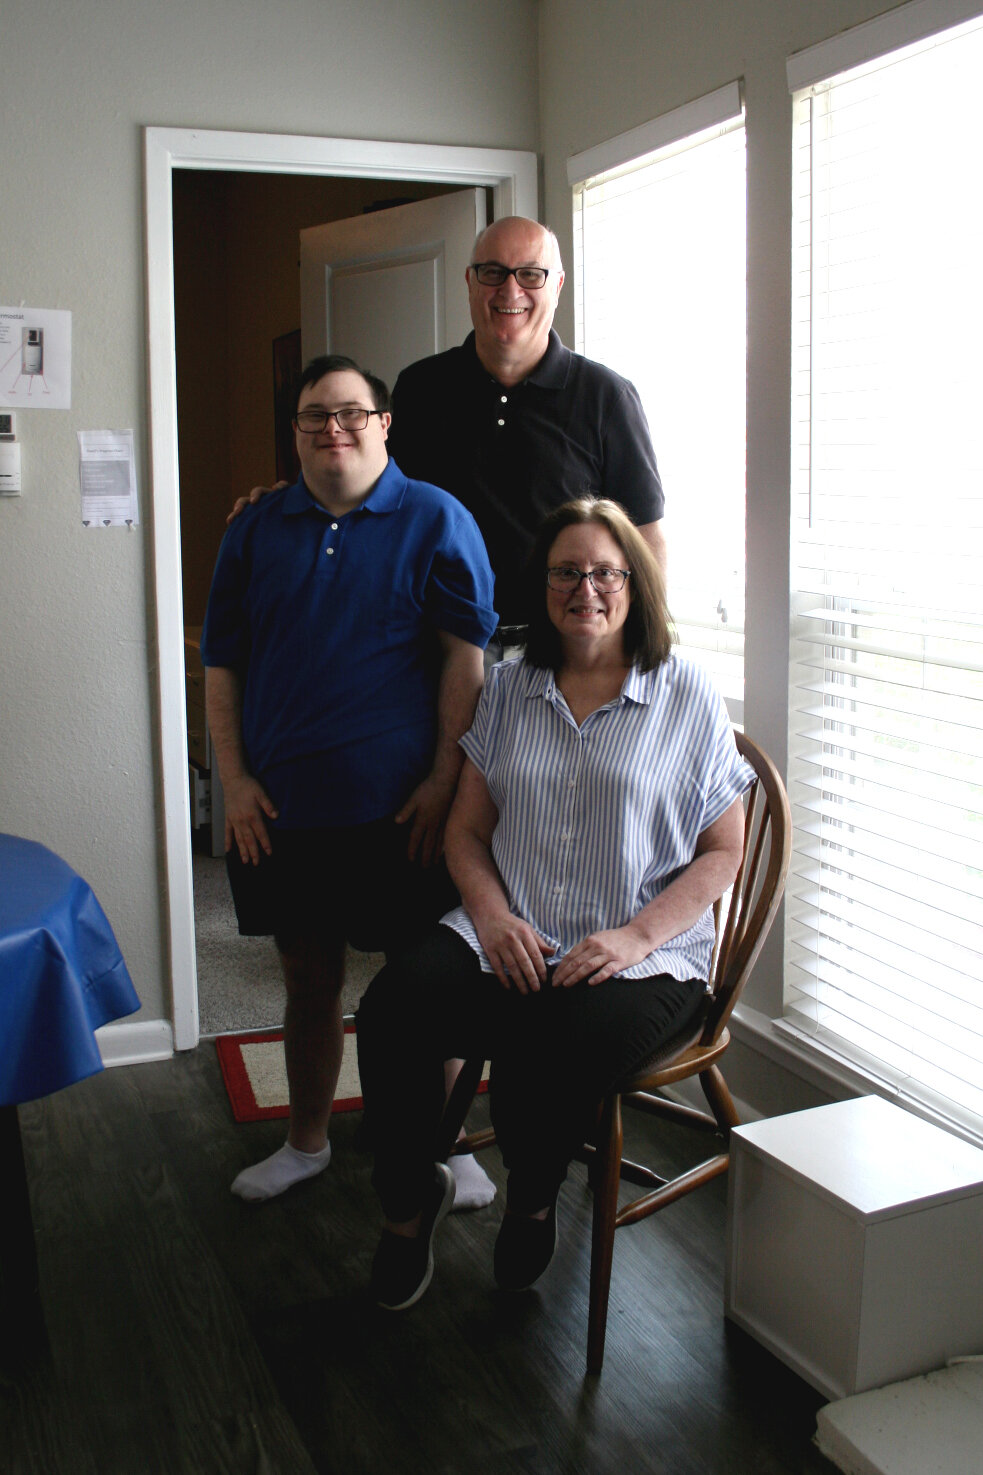 David with his dad, Jim, and mom, Robin at his apartment in Plano.